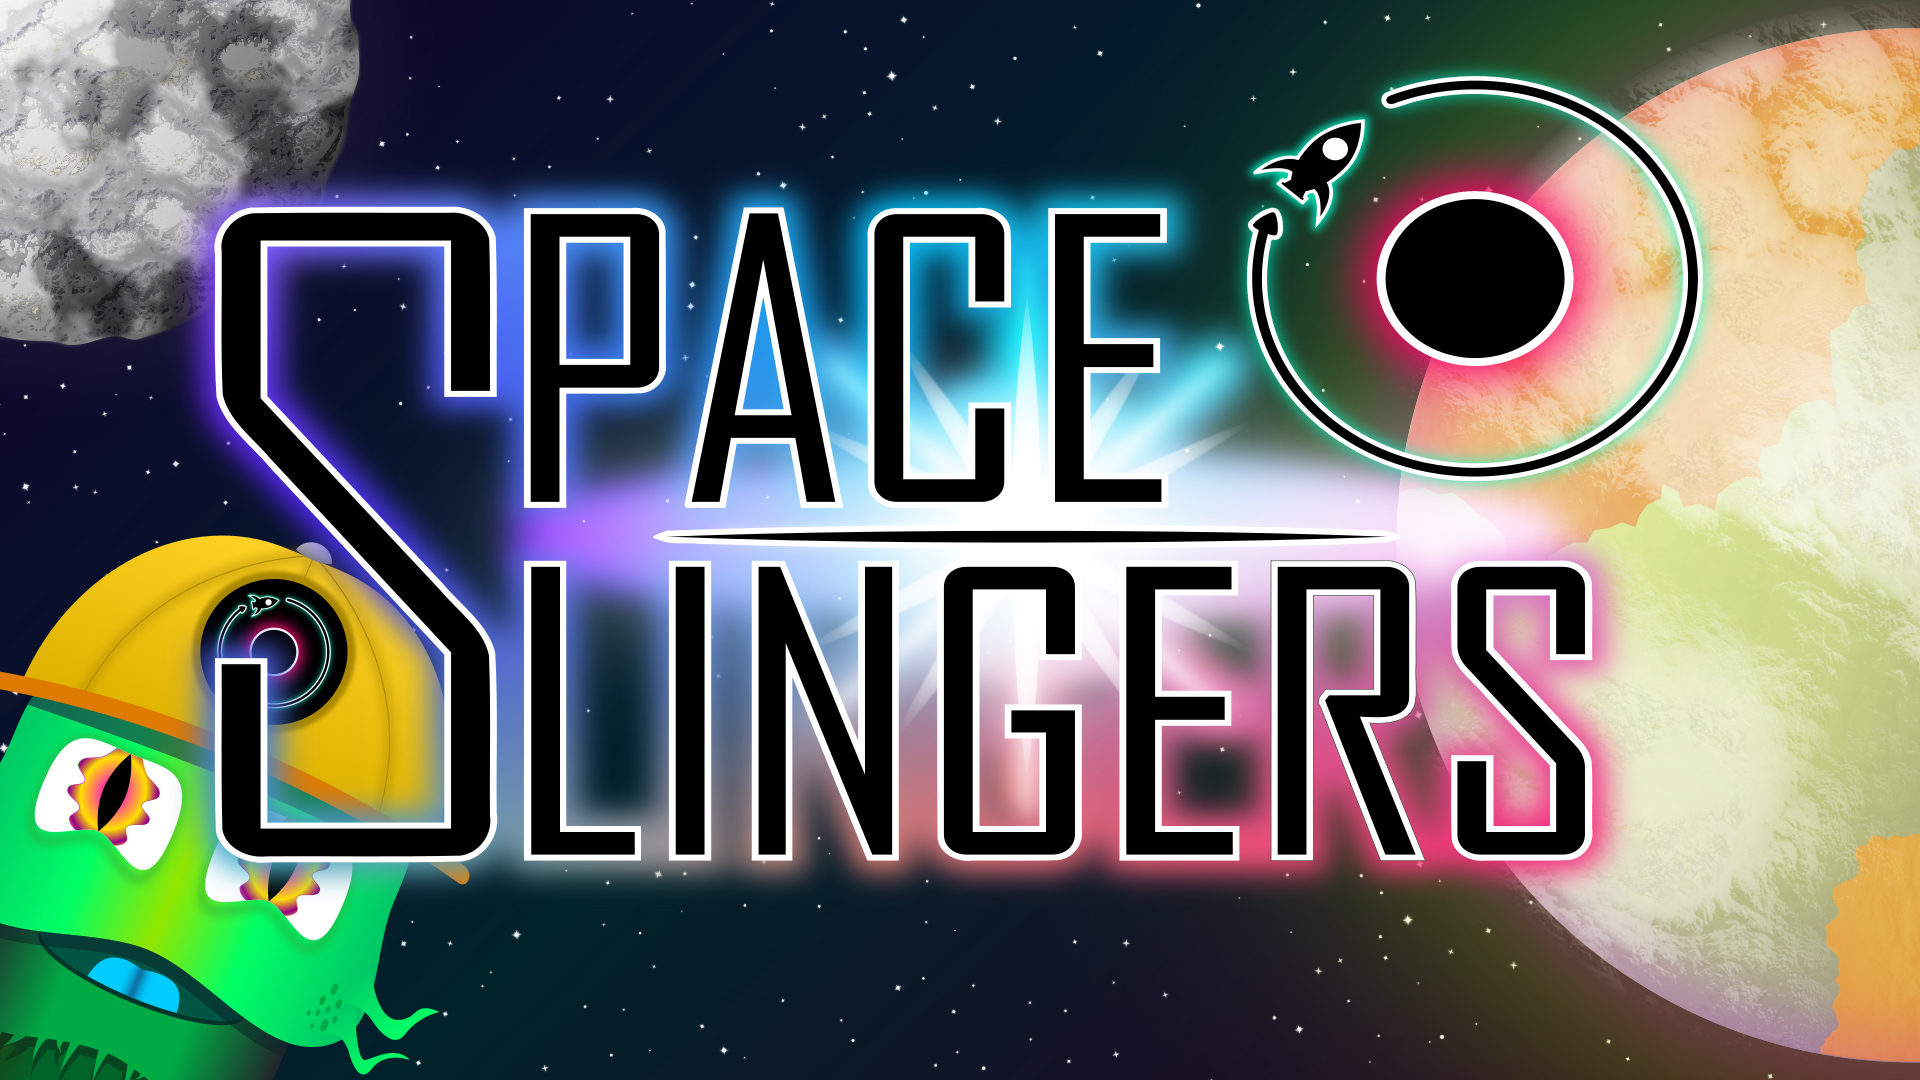 ‘Spaceslingers’ is the trajectory sport for puzzle-loving insist fans (review)